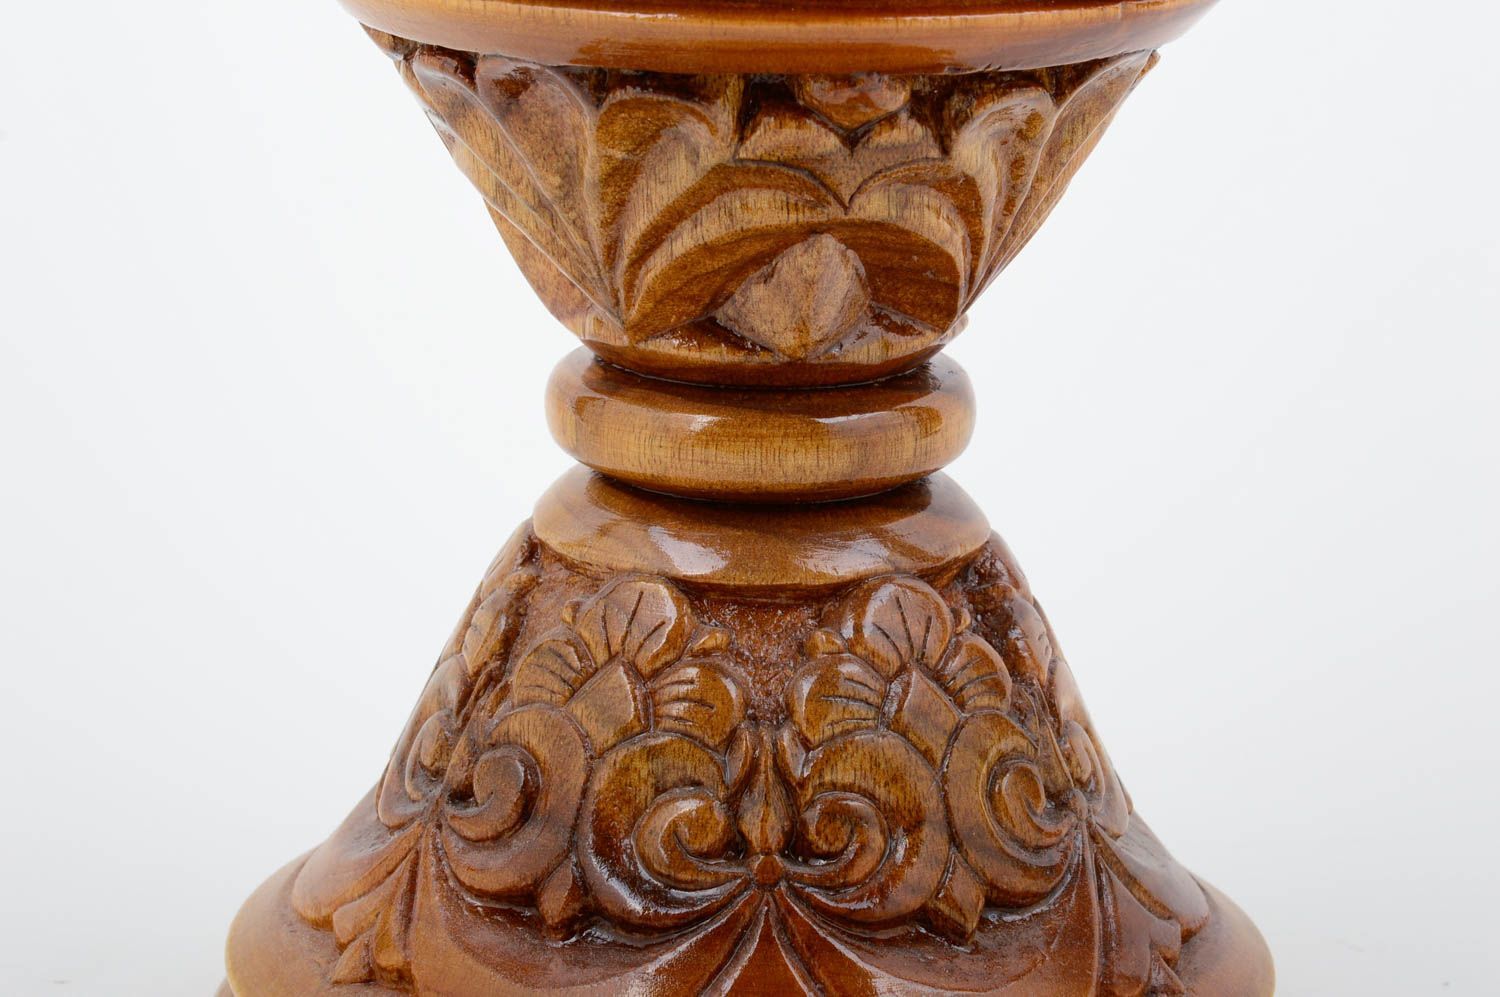 Large handmade wooden vase woodcarving ideas the living room gift ideas photo 4